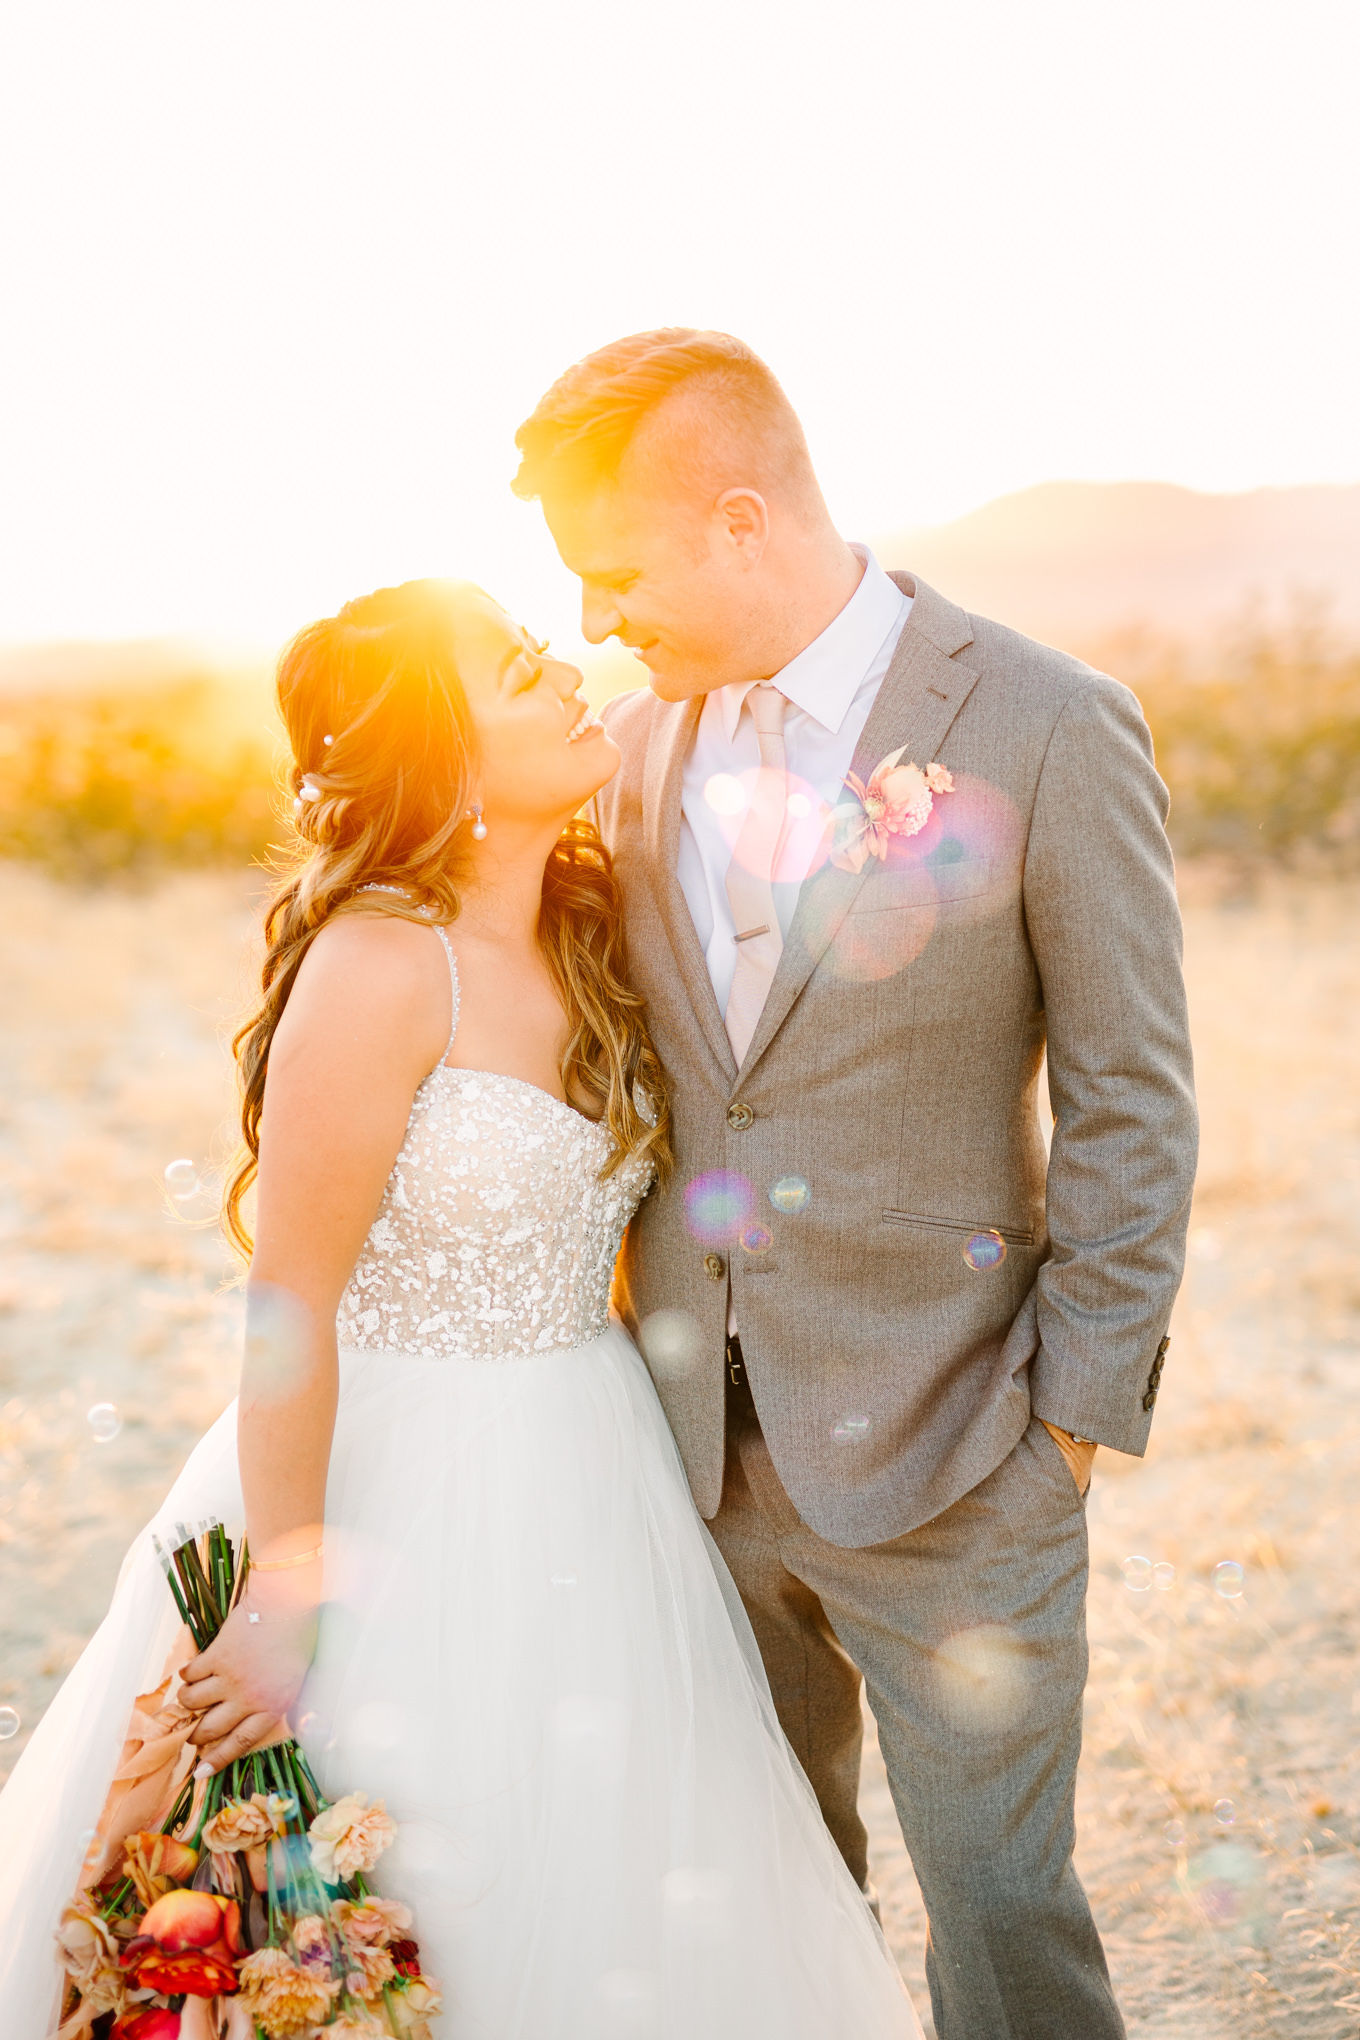 Bride and groom portrait at sunset with bubbles | Pink and orange Lautner Compound wedding | Colorful Palm Springs wedding photography | #palmspringsphotographer #palmspringswedding #lautnercompound #southerncaliforniawedding  Source: Mary Costa Photography | Los Angeles